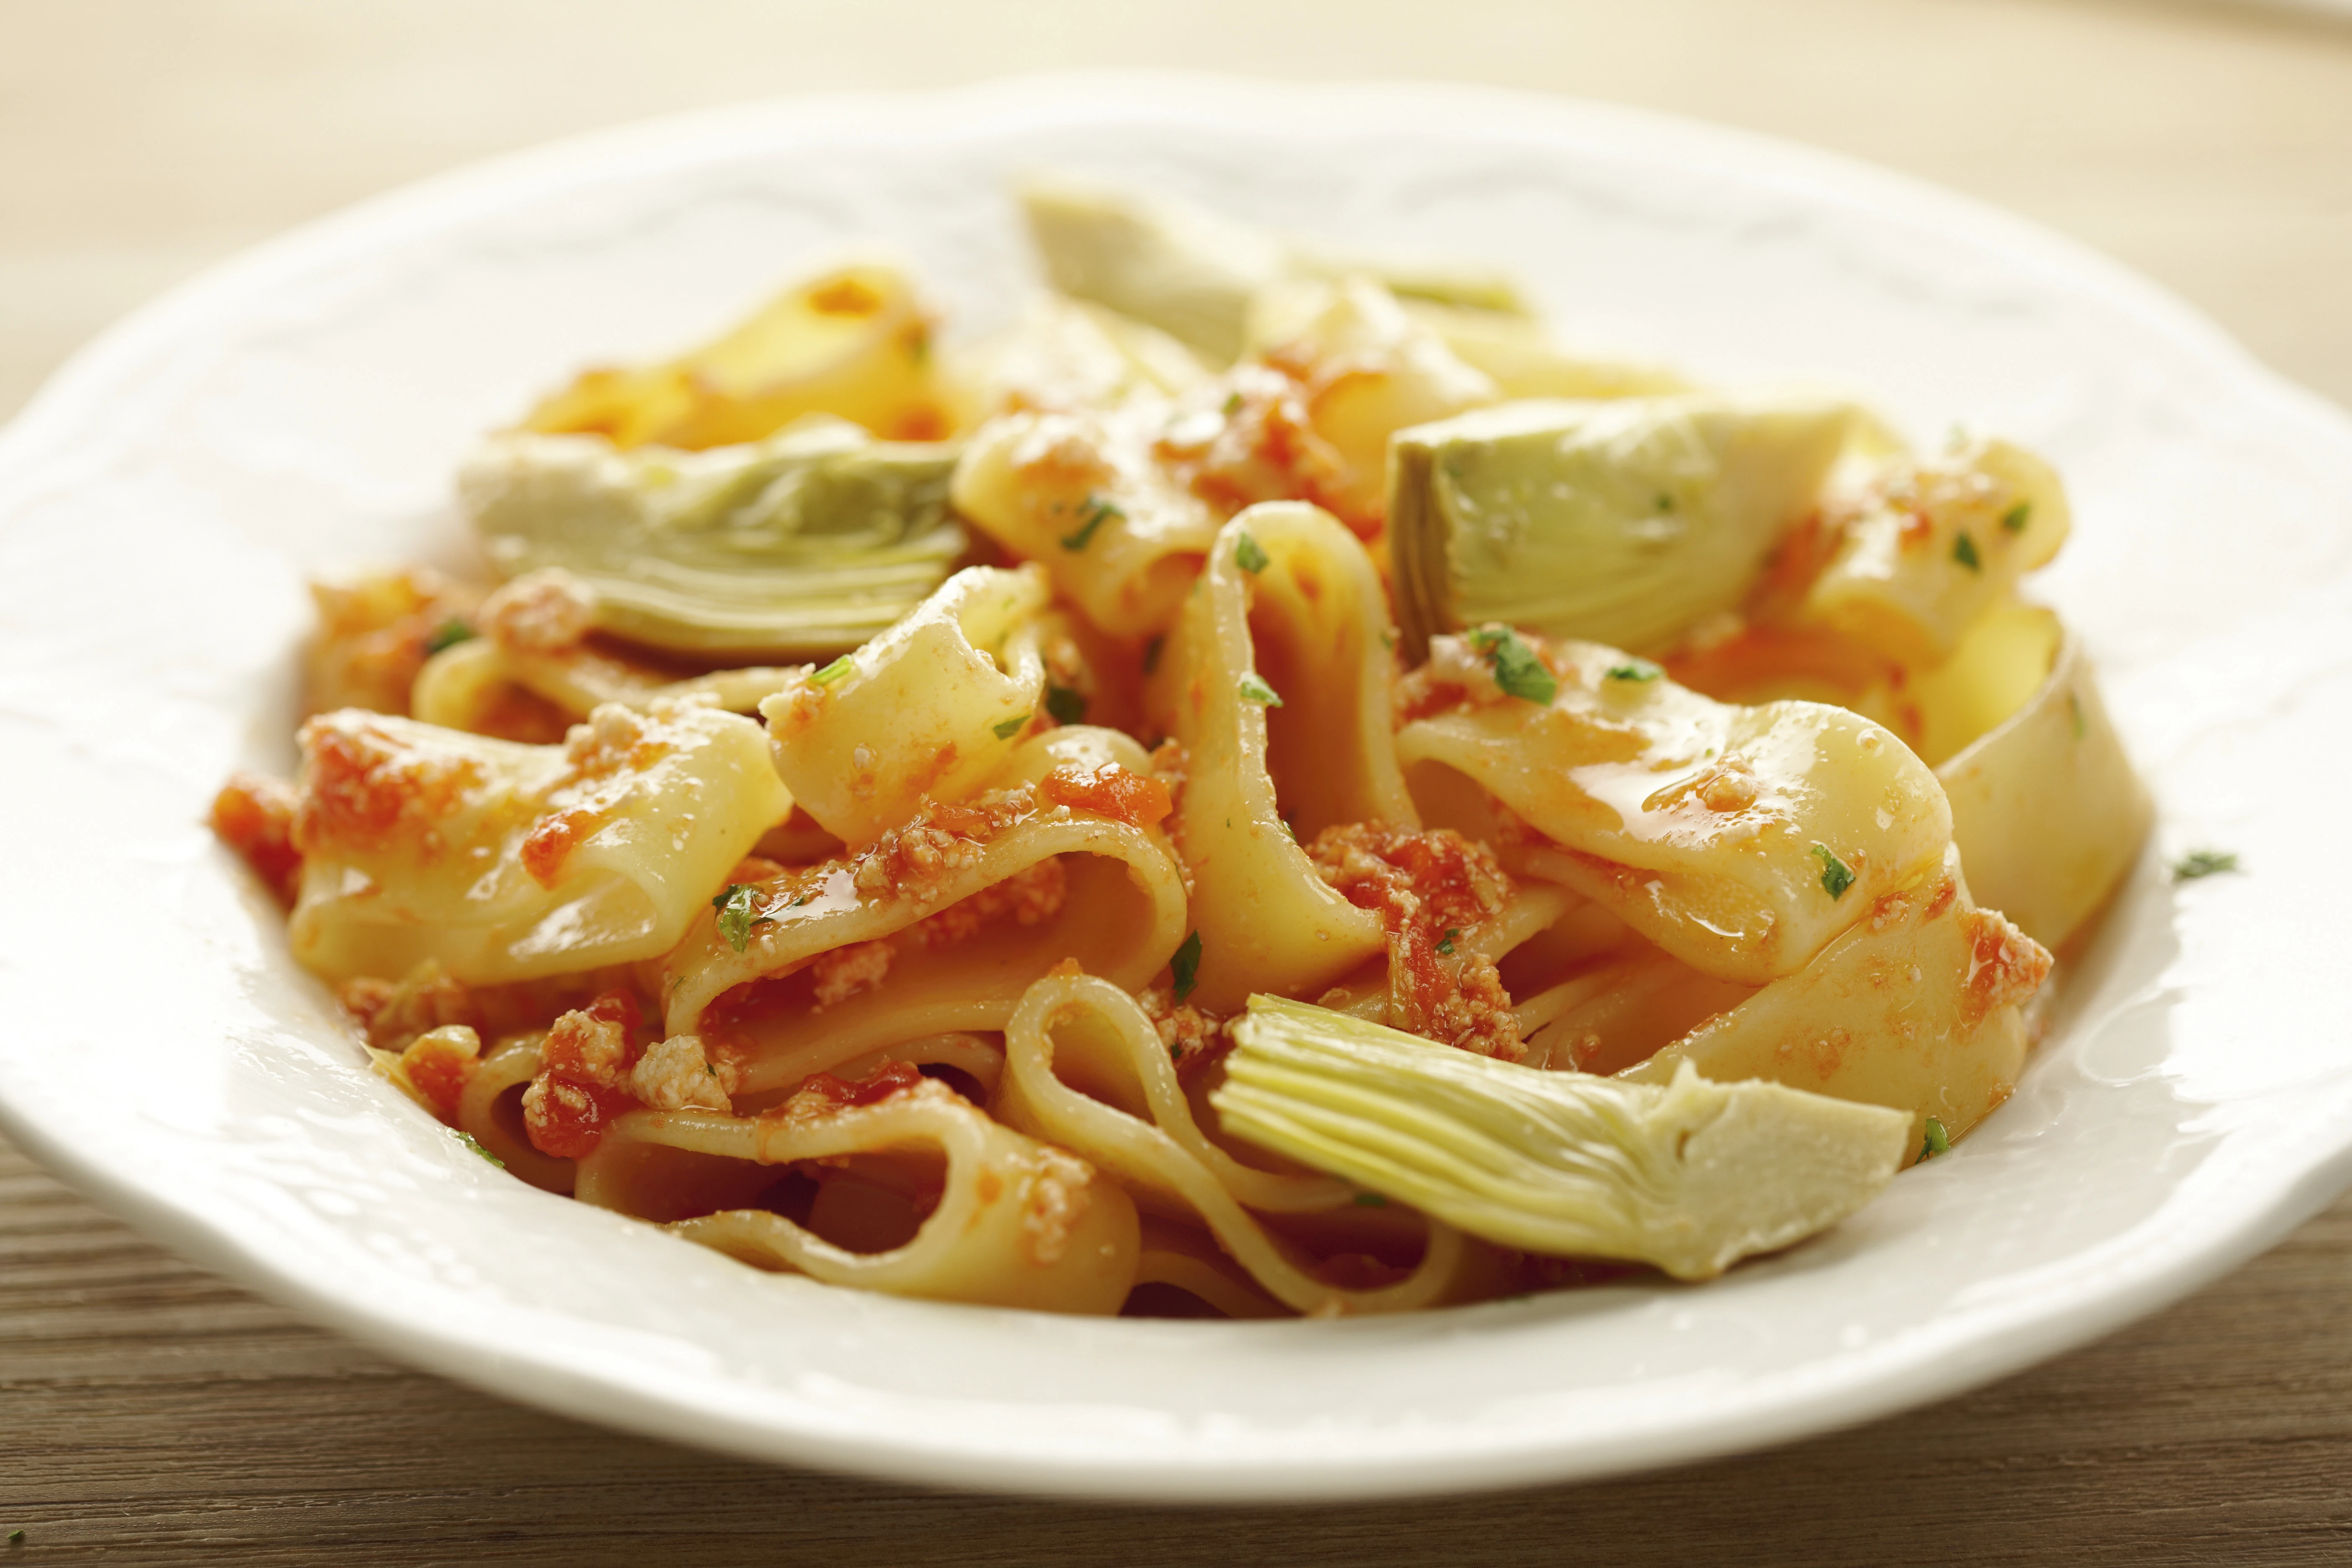 Finest Quality- Tomato pulp Artichokes Cow and Sheep Ricotta Cheeses Sauce Ideal for a genuine lunch on-the-go